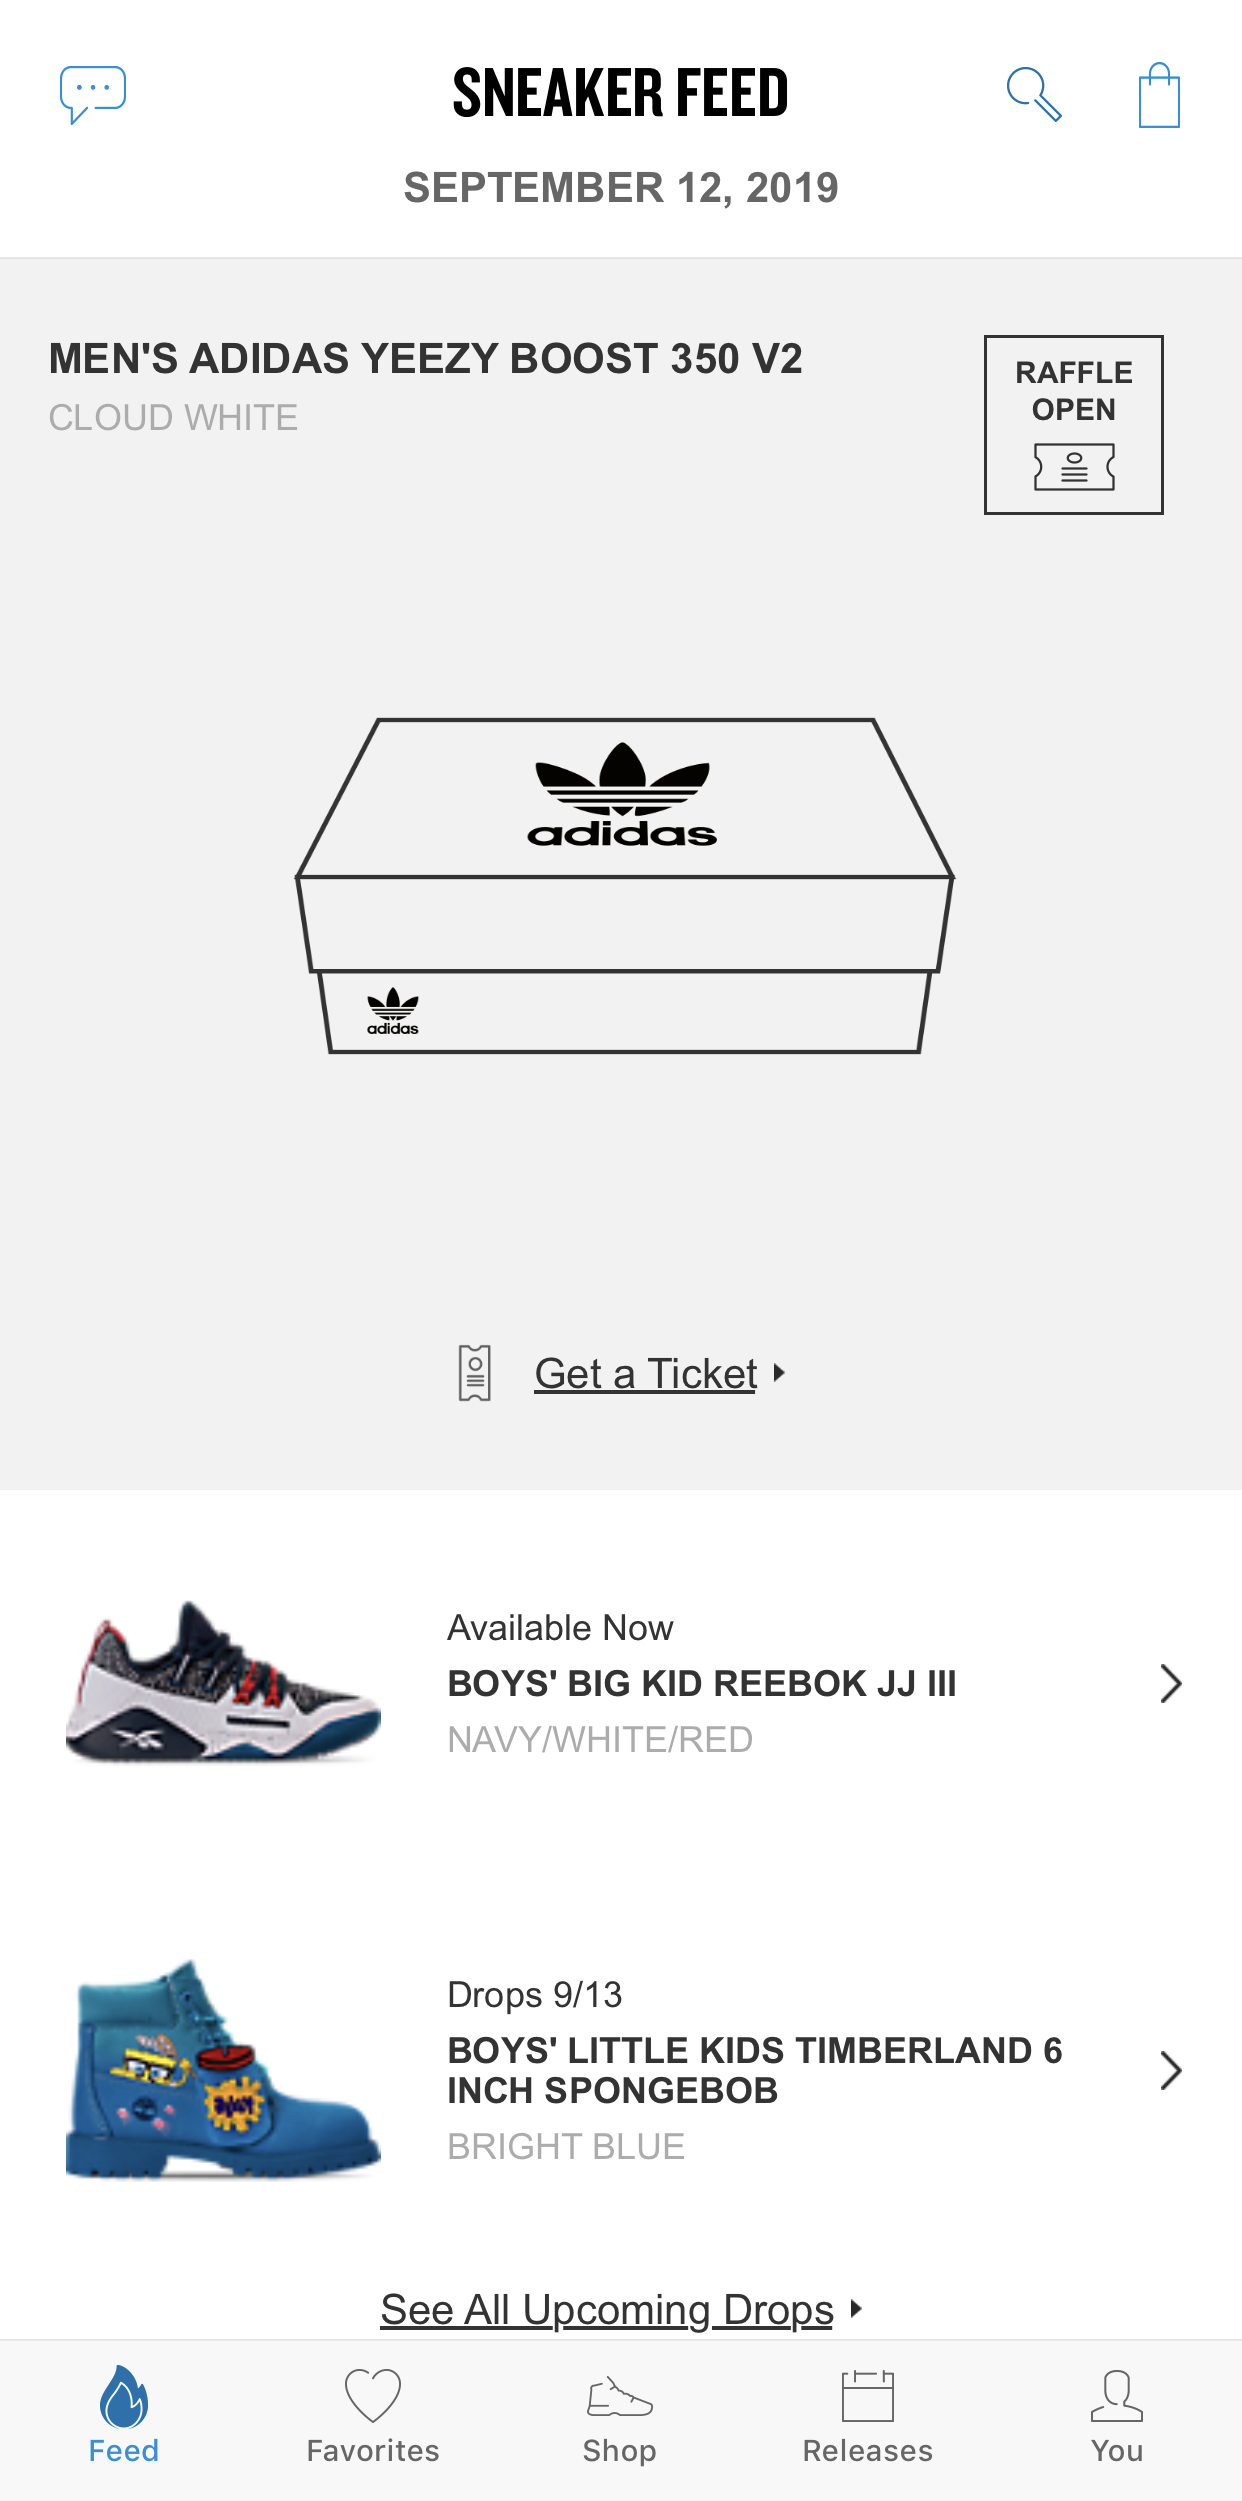 Nike SNKRS 101 - How To Buy And Win Sneakers On The SNKRS App - Sneaker News